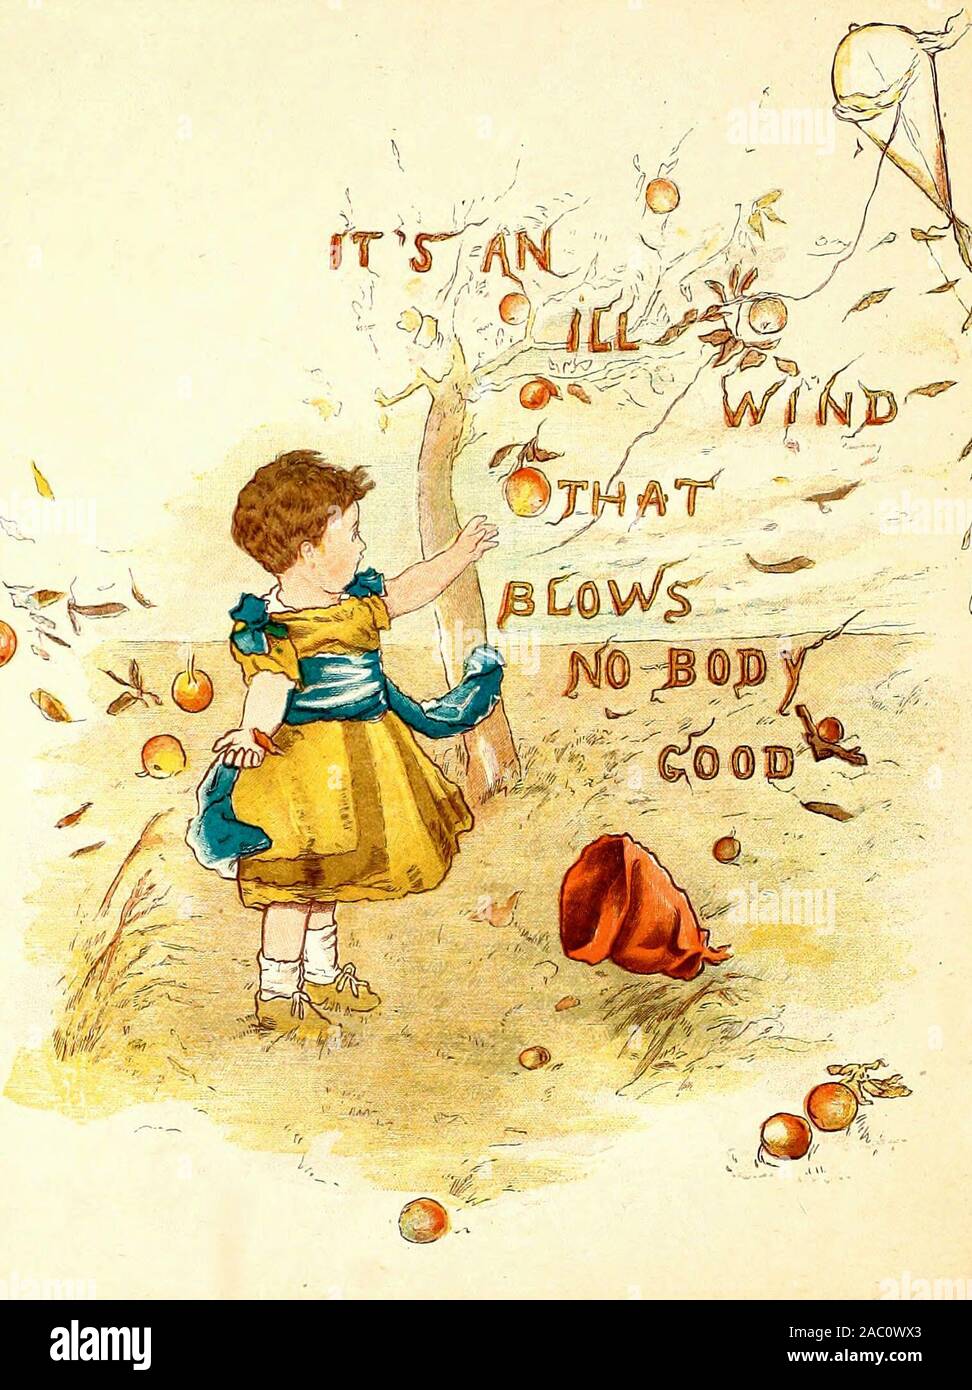 It's an ill wind that blows no body good - A vintage illustration of an old proverb Stock Photo